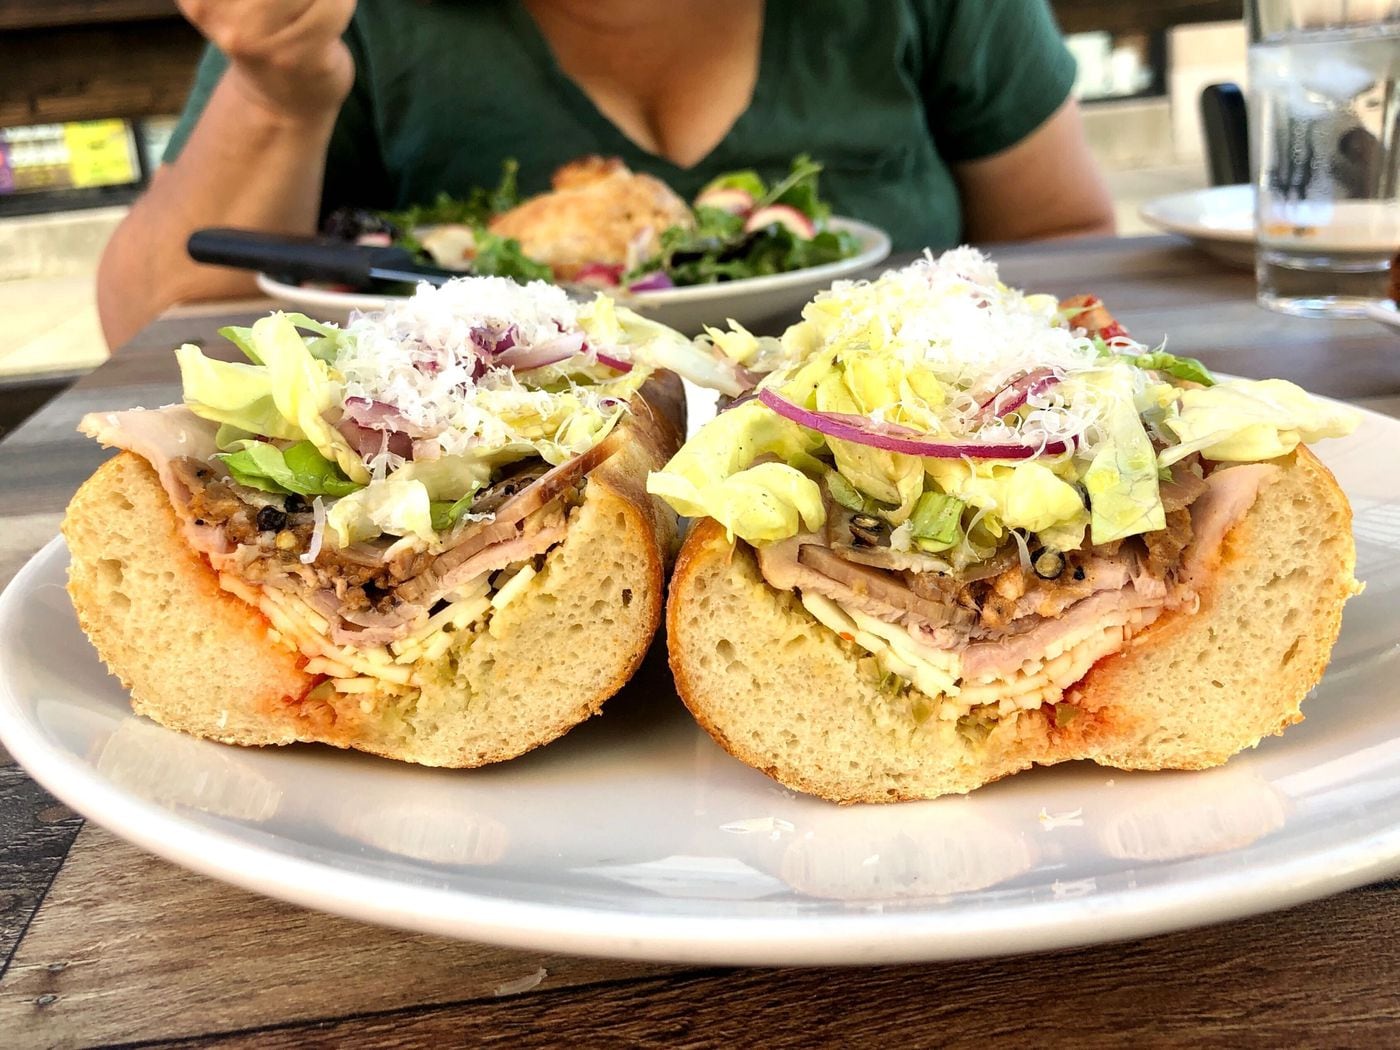 The smoked hoagie at Standard Tap is new chef Patrick Limanni's hand-crafted ode to the classic, with three kinds of house-cured and smoked meats layered with olive and pepper spreads over the house sourdough baguettes.